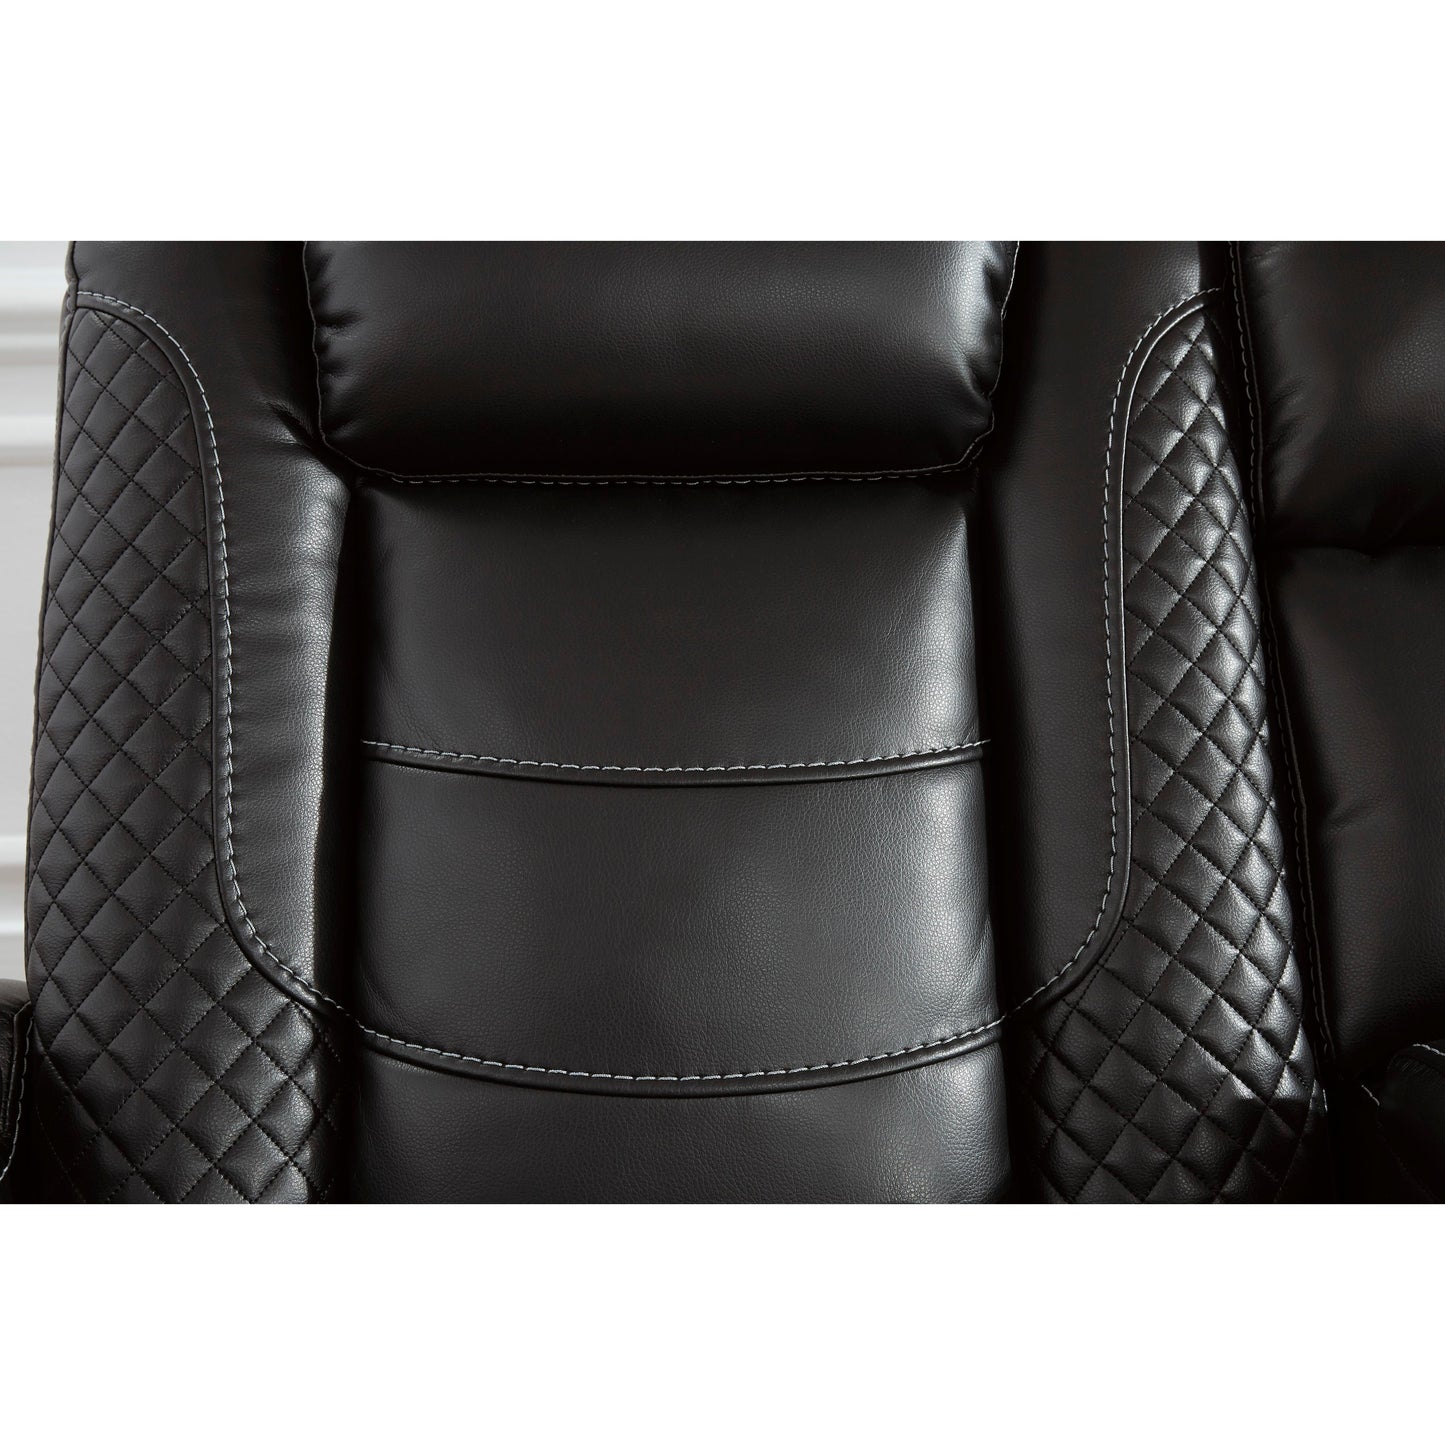 Signature Design by Ashley Party Time Power Leather Look Recliner 3700313